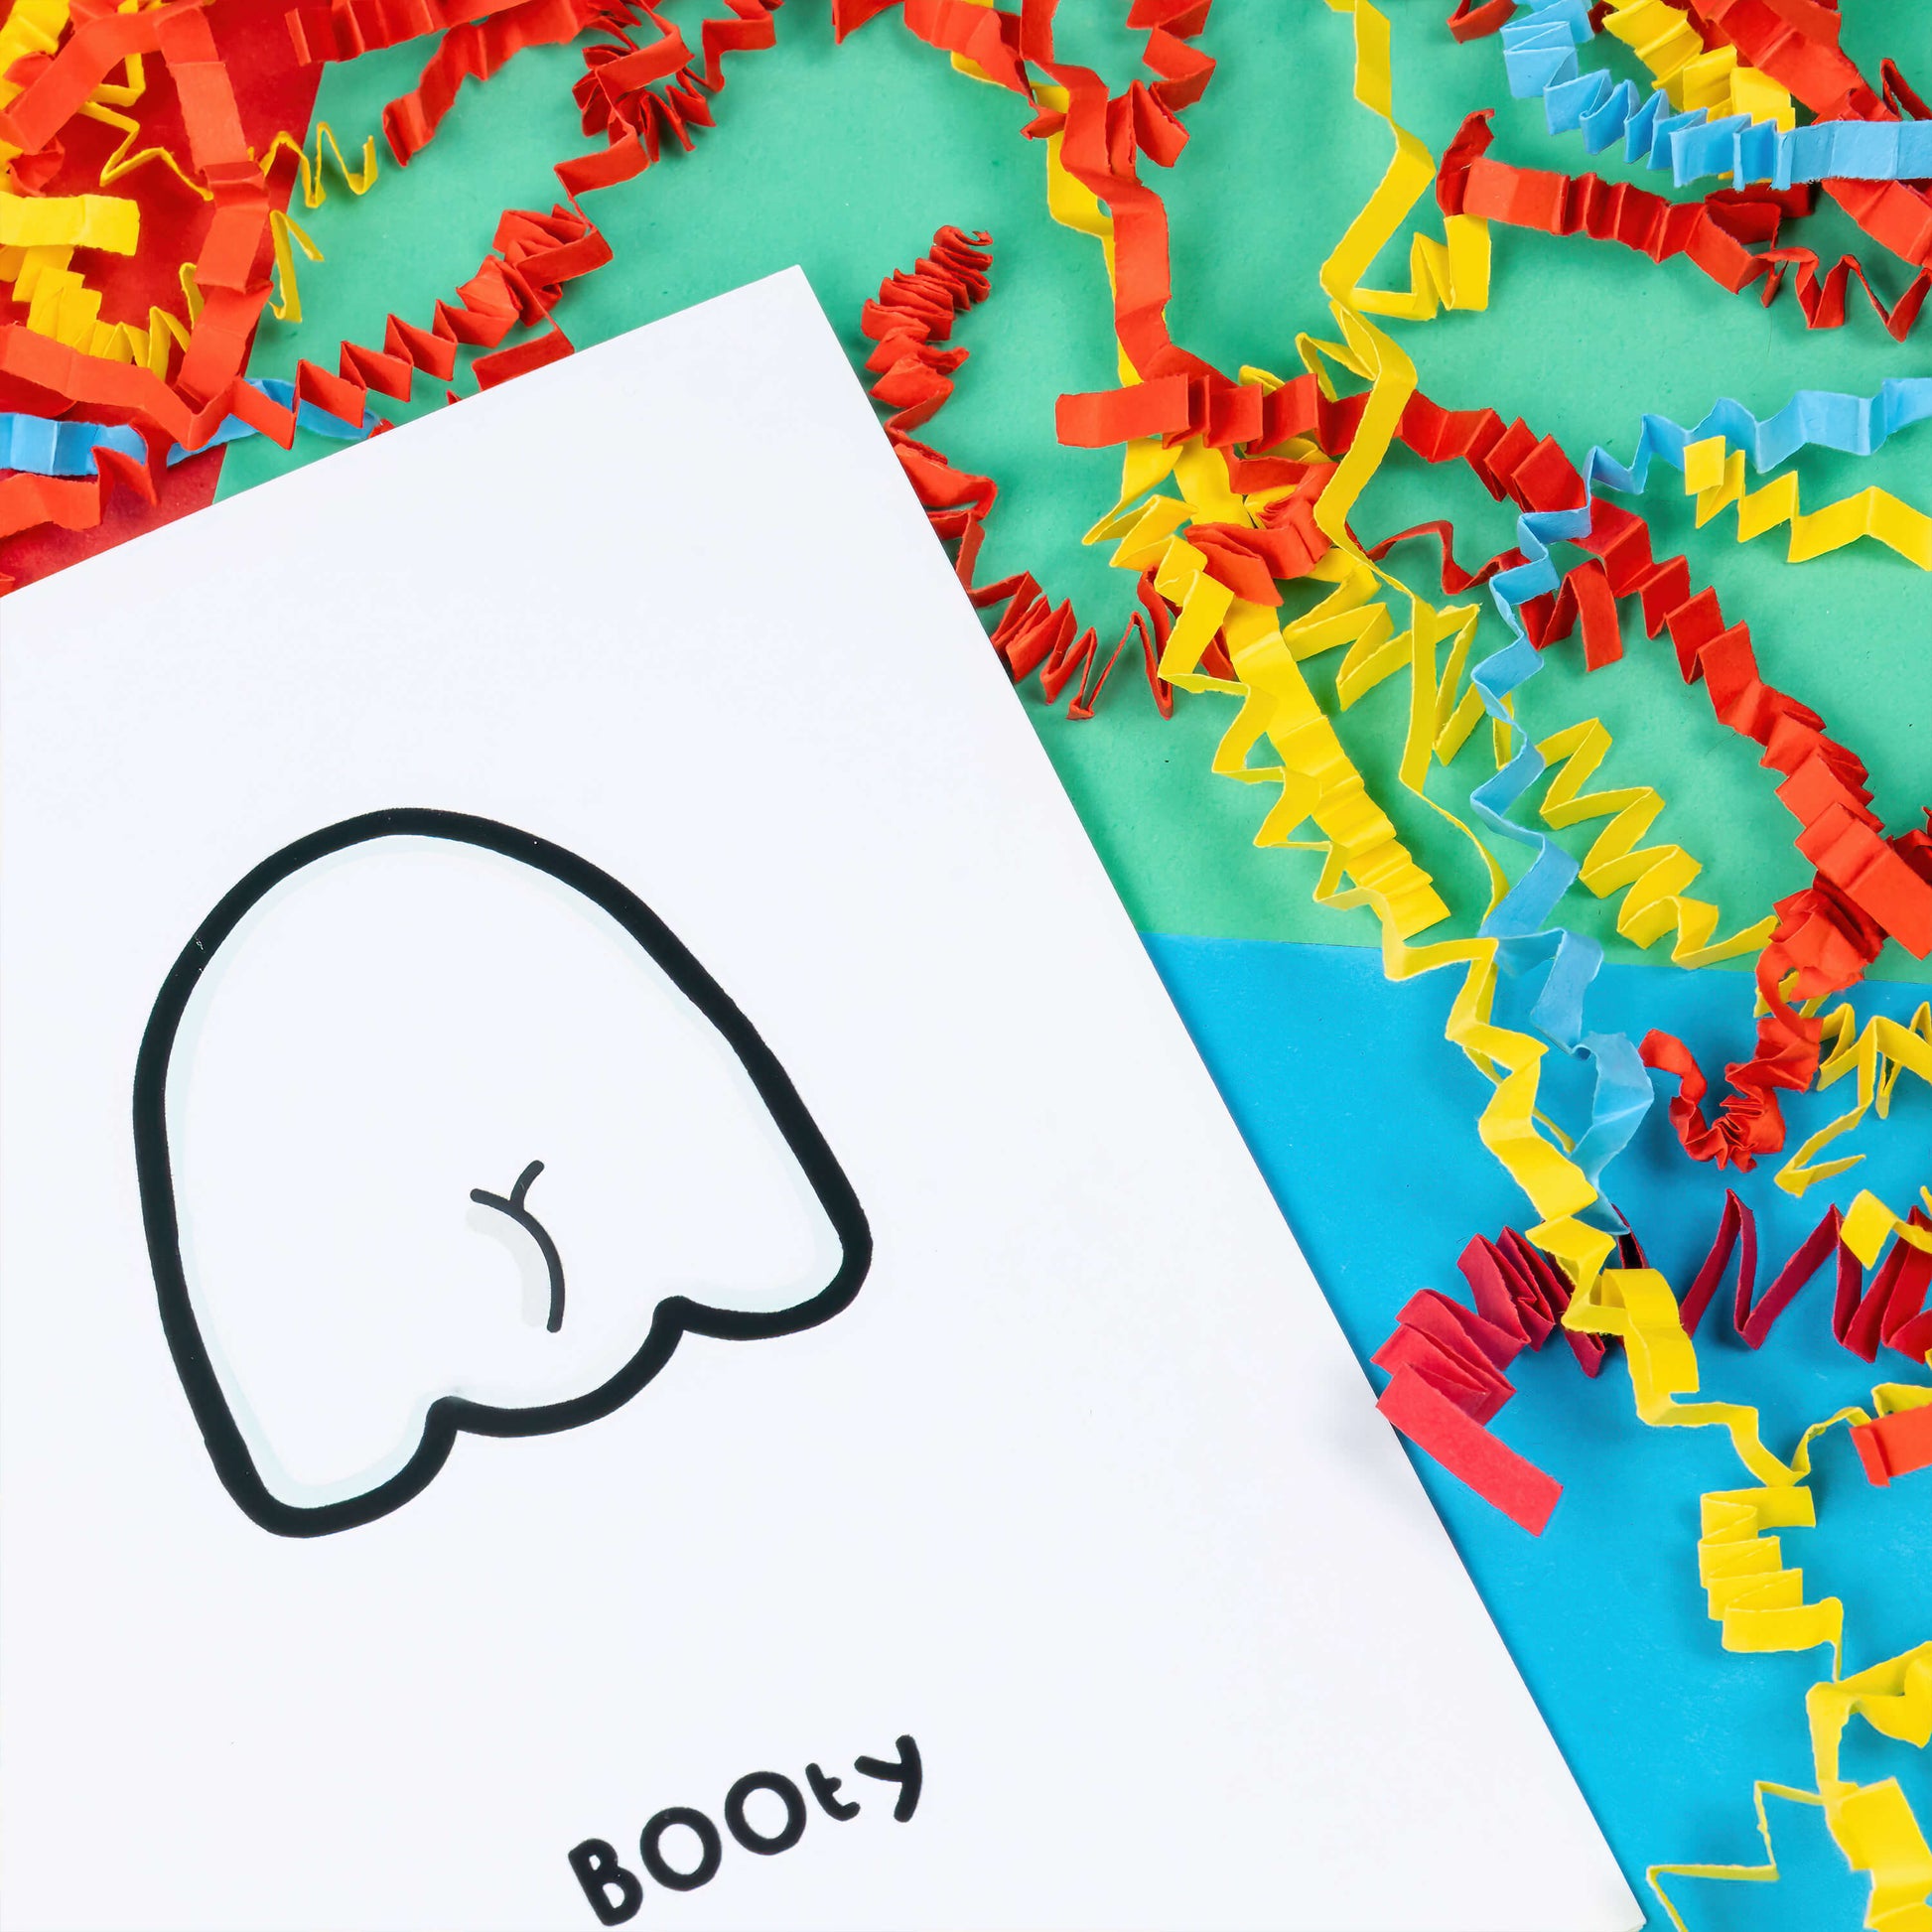 Close up of The Booty Ghost a6 card on a blue, red and green background with yellow, blue and red crinkle card confetti. A white greeting card with an illustration of the back of a ghost with a bum crack. The word 'BOOty" is written in black underneath the drawing.